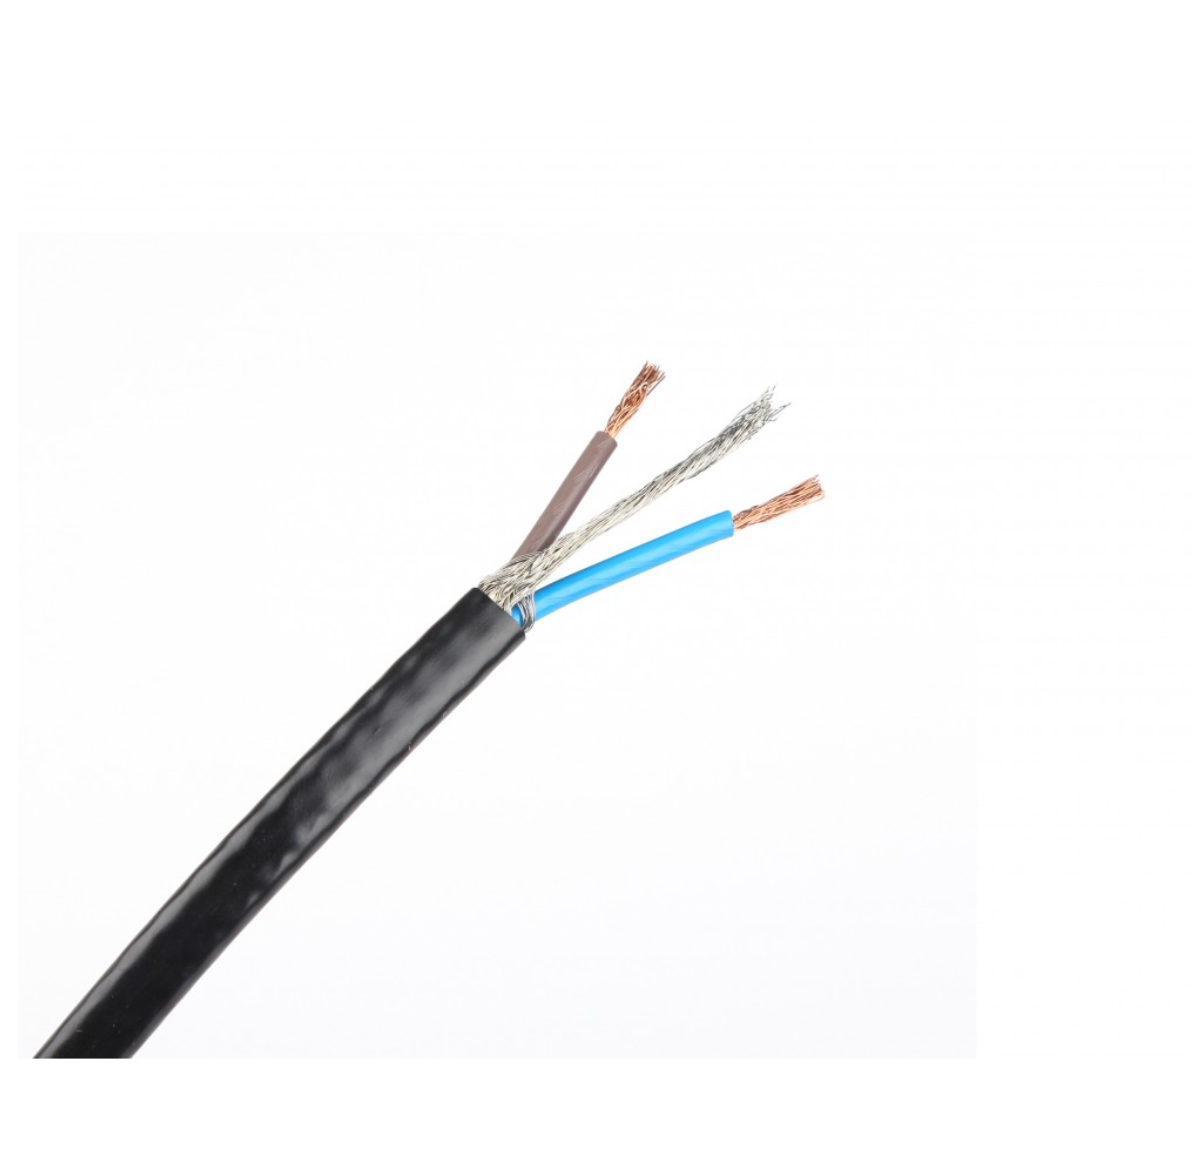 Heating cable - 70m